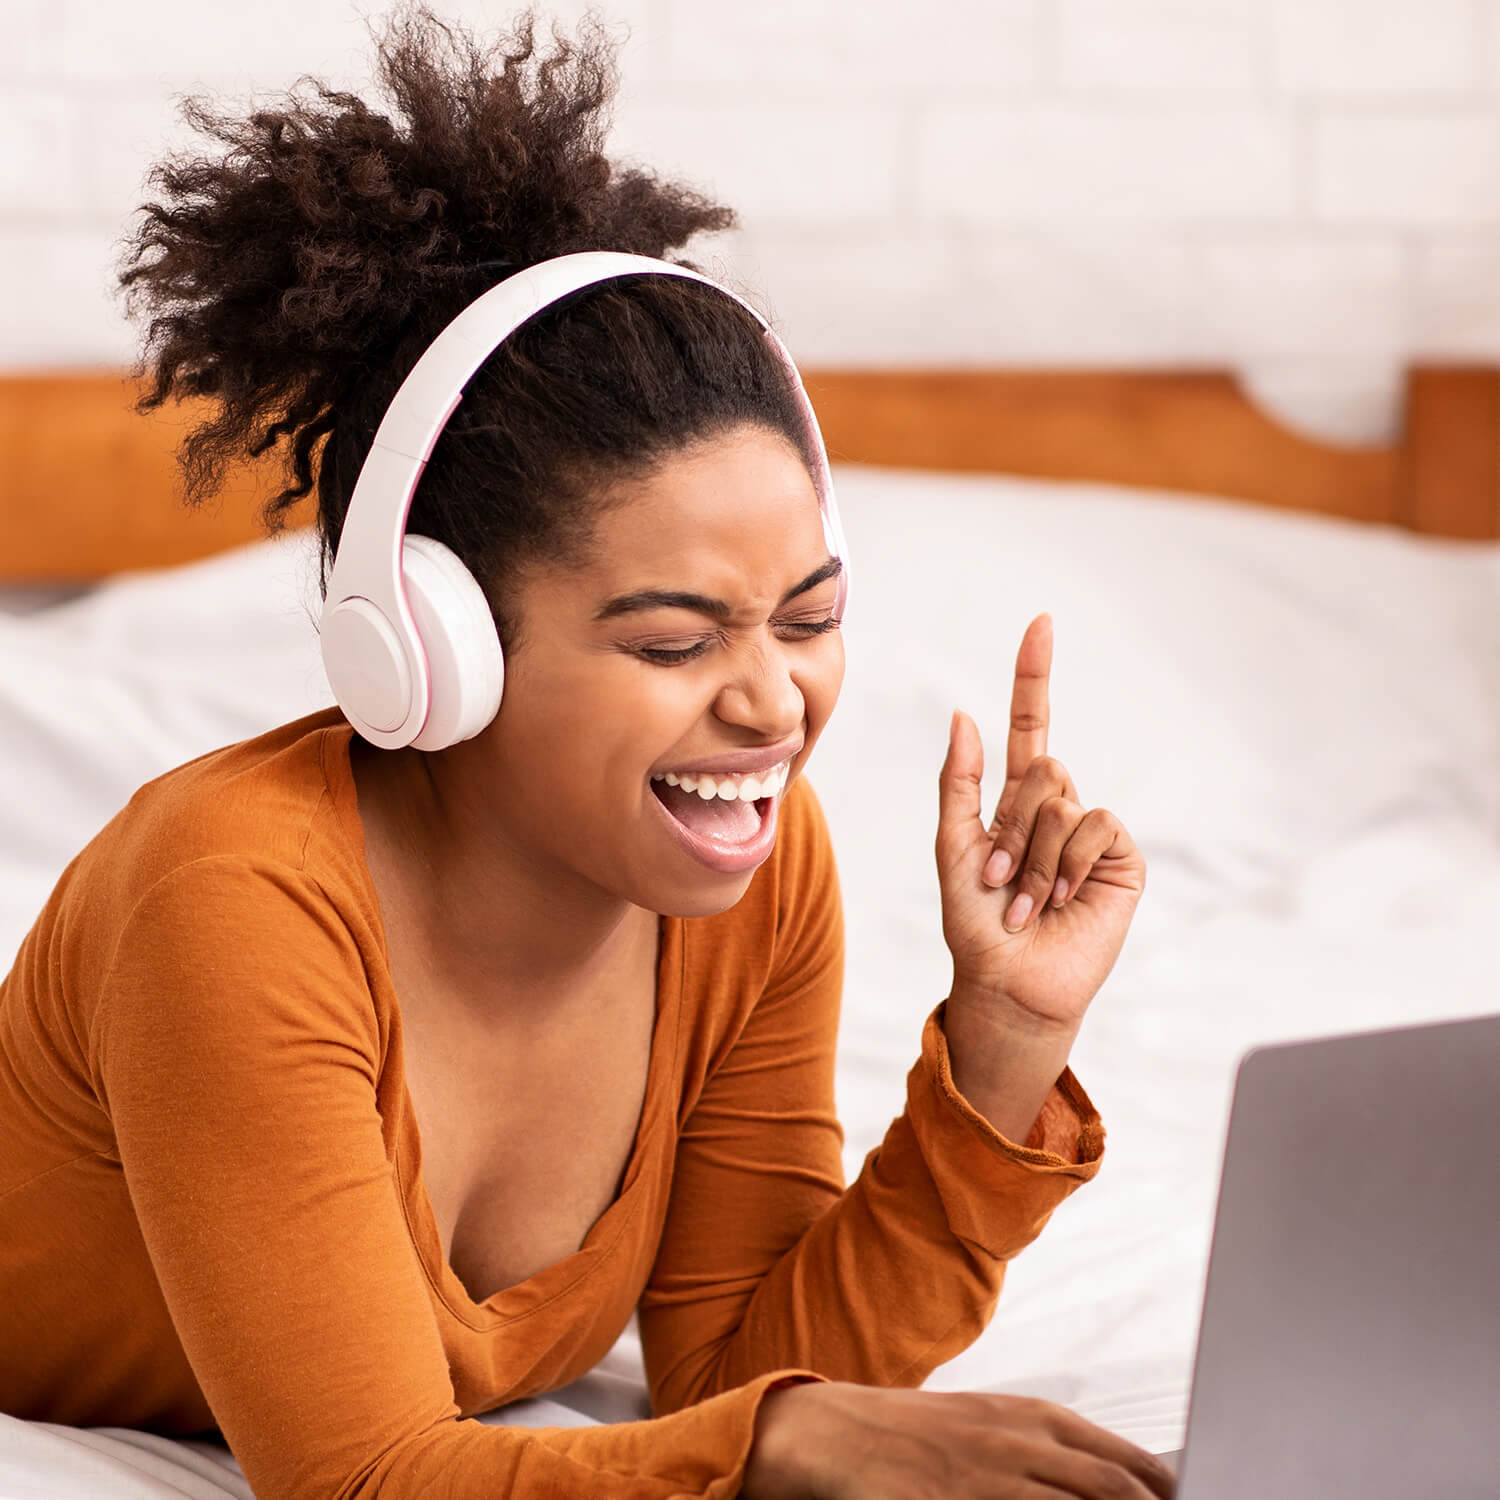 Happy woman with headphone watching a Vala muzi on her laptop while lay on her bed